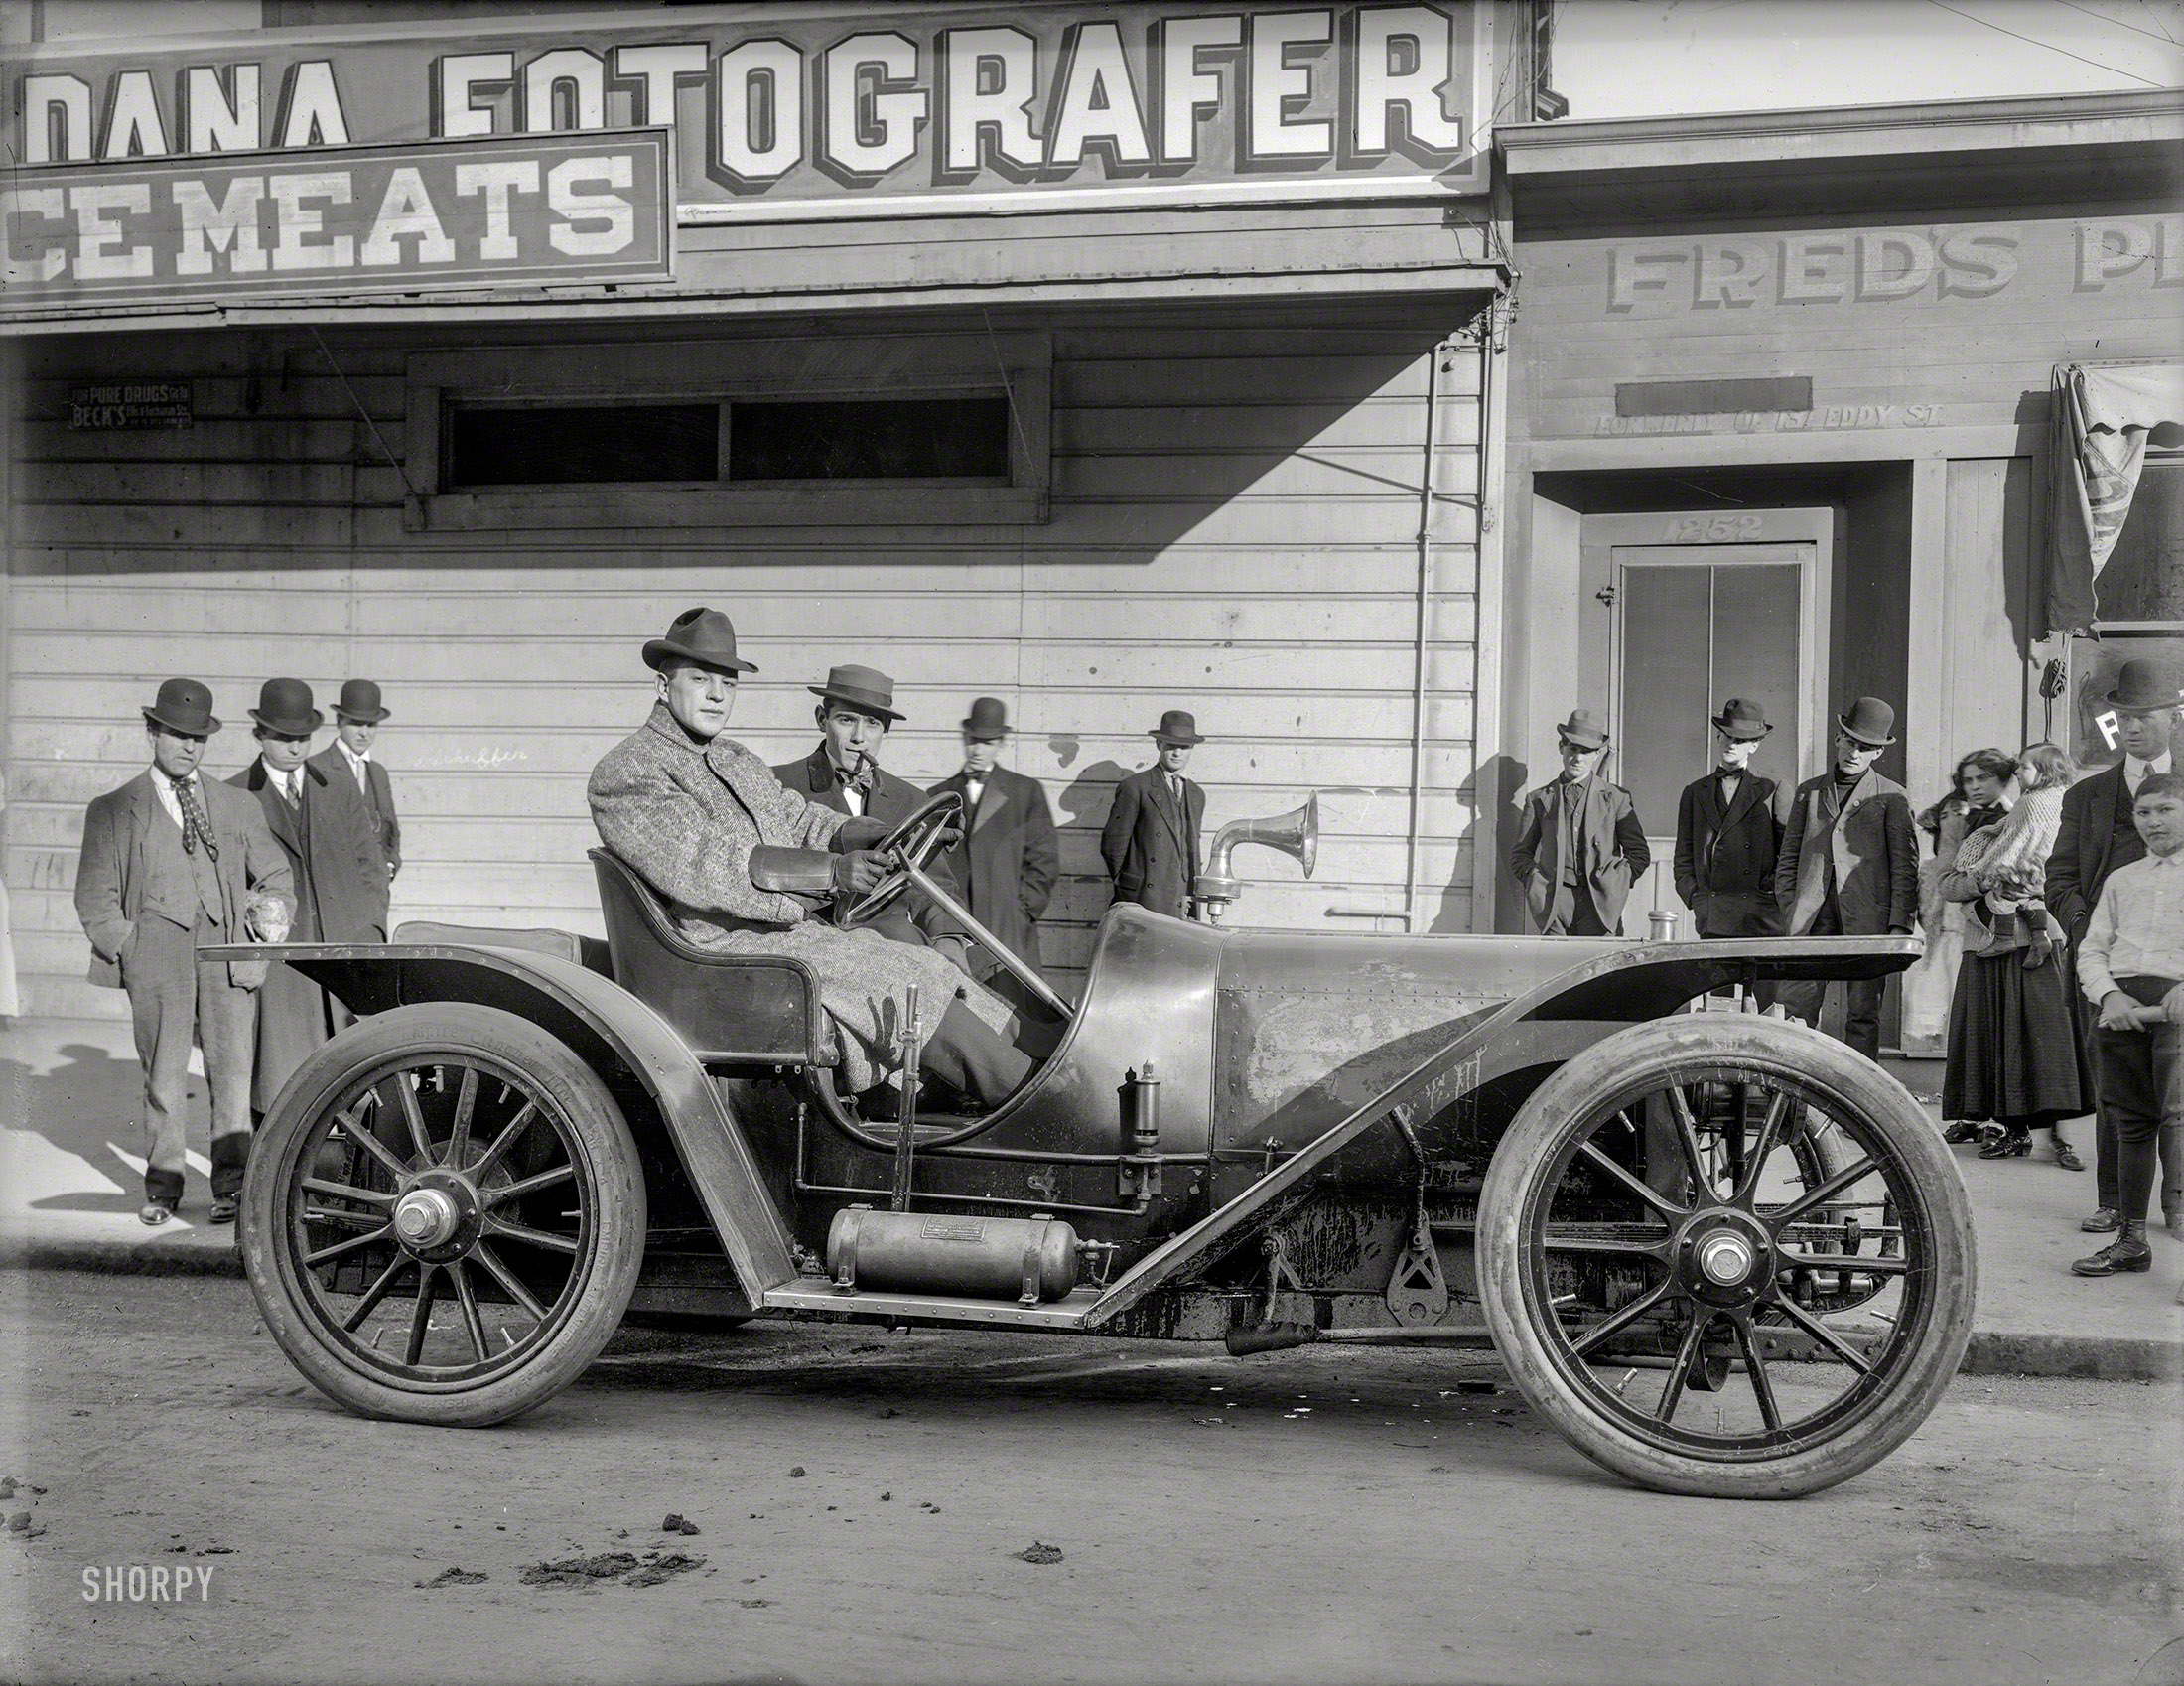 San Francisco, 1908. "Boxer Stanley Ketchel at wheel of American Underslung auto with manager Britt Willis." Both of whom would be dead not long after this photo was made -- middleweight champion Ketchel (the "Michigan Assasssin") fatally shot in a training-camp robbery in 1910, and Willis the victim of a "violent stomach hemorrhage" in 1909. Their car, an American Underslung, was among the first to employ the now-universal dropped frame, with the bottom of the car below the axles. 6½ x 8½ glass negative by Dana Studio, from the collection of George Whitney Jr. (1922-2002), owner of the Cliff House restaurant. View full size.